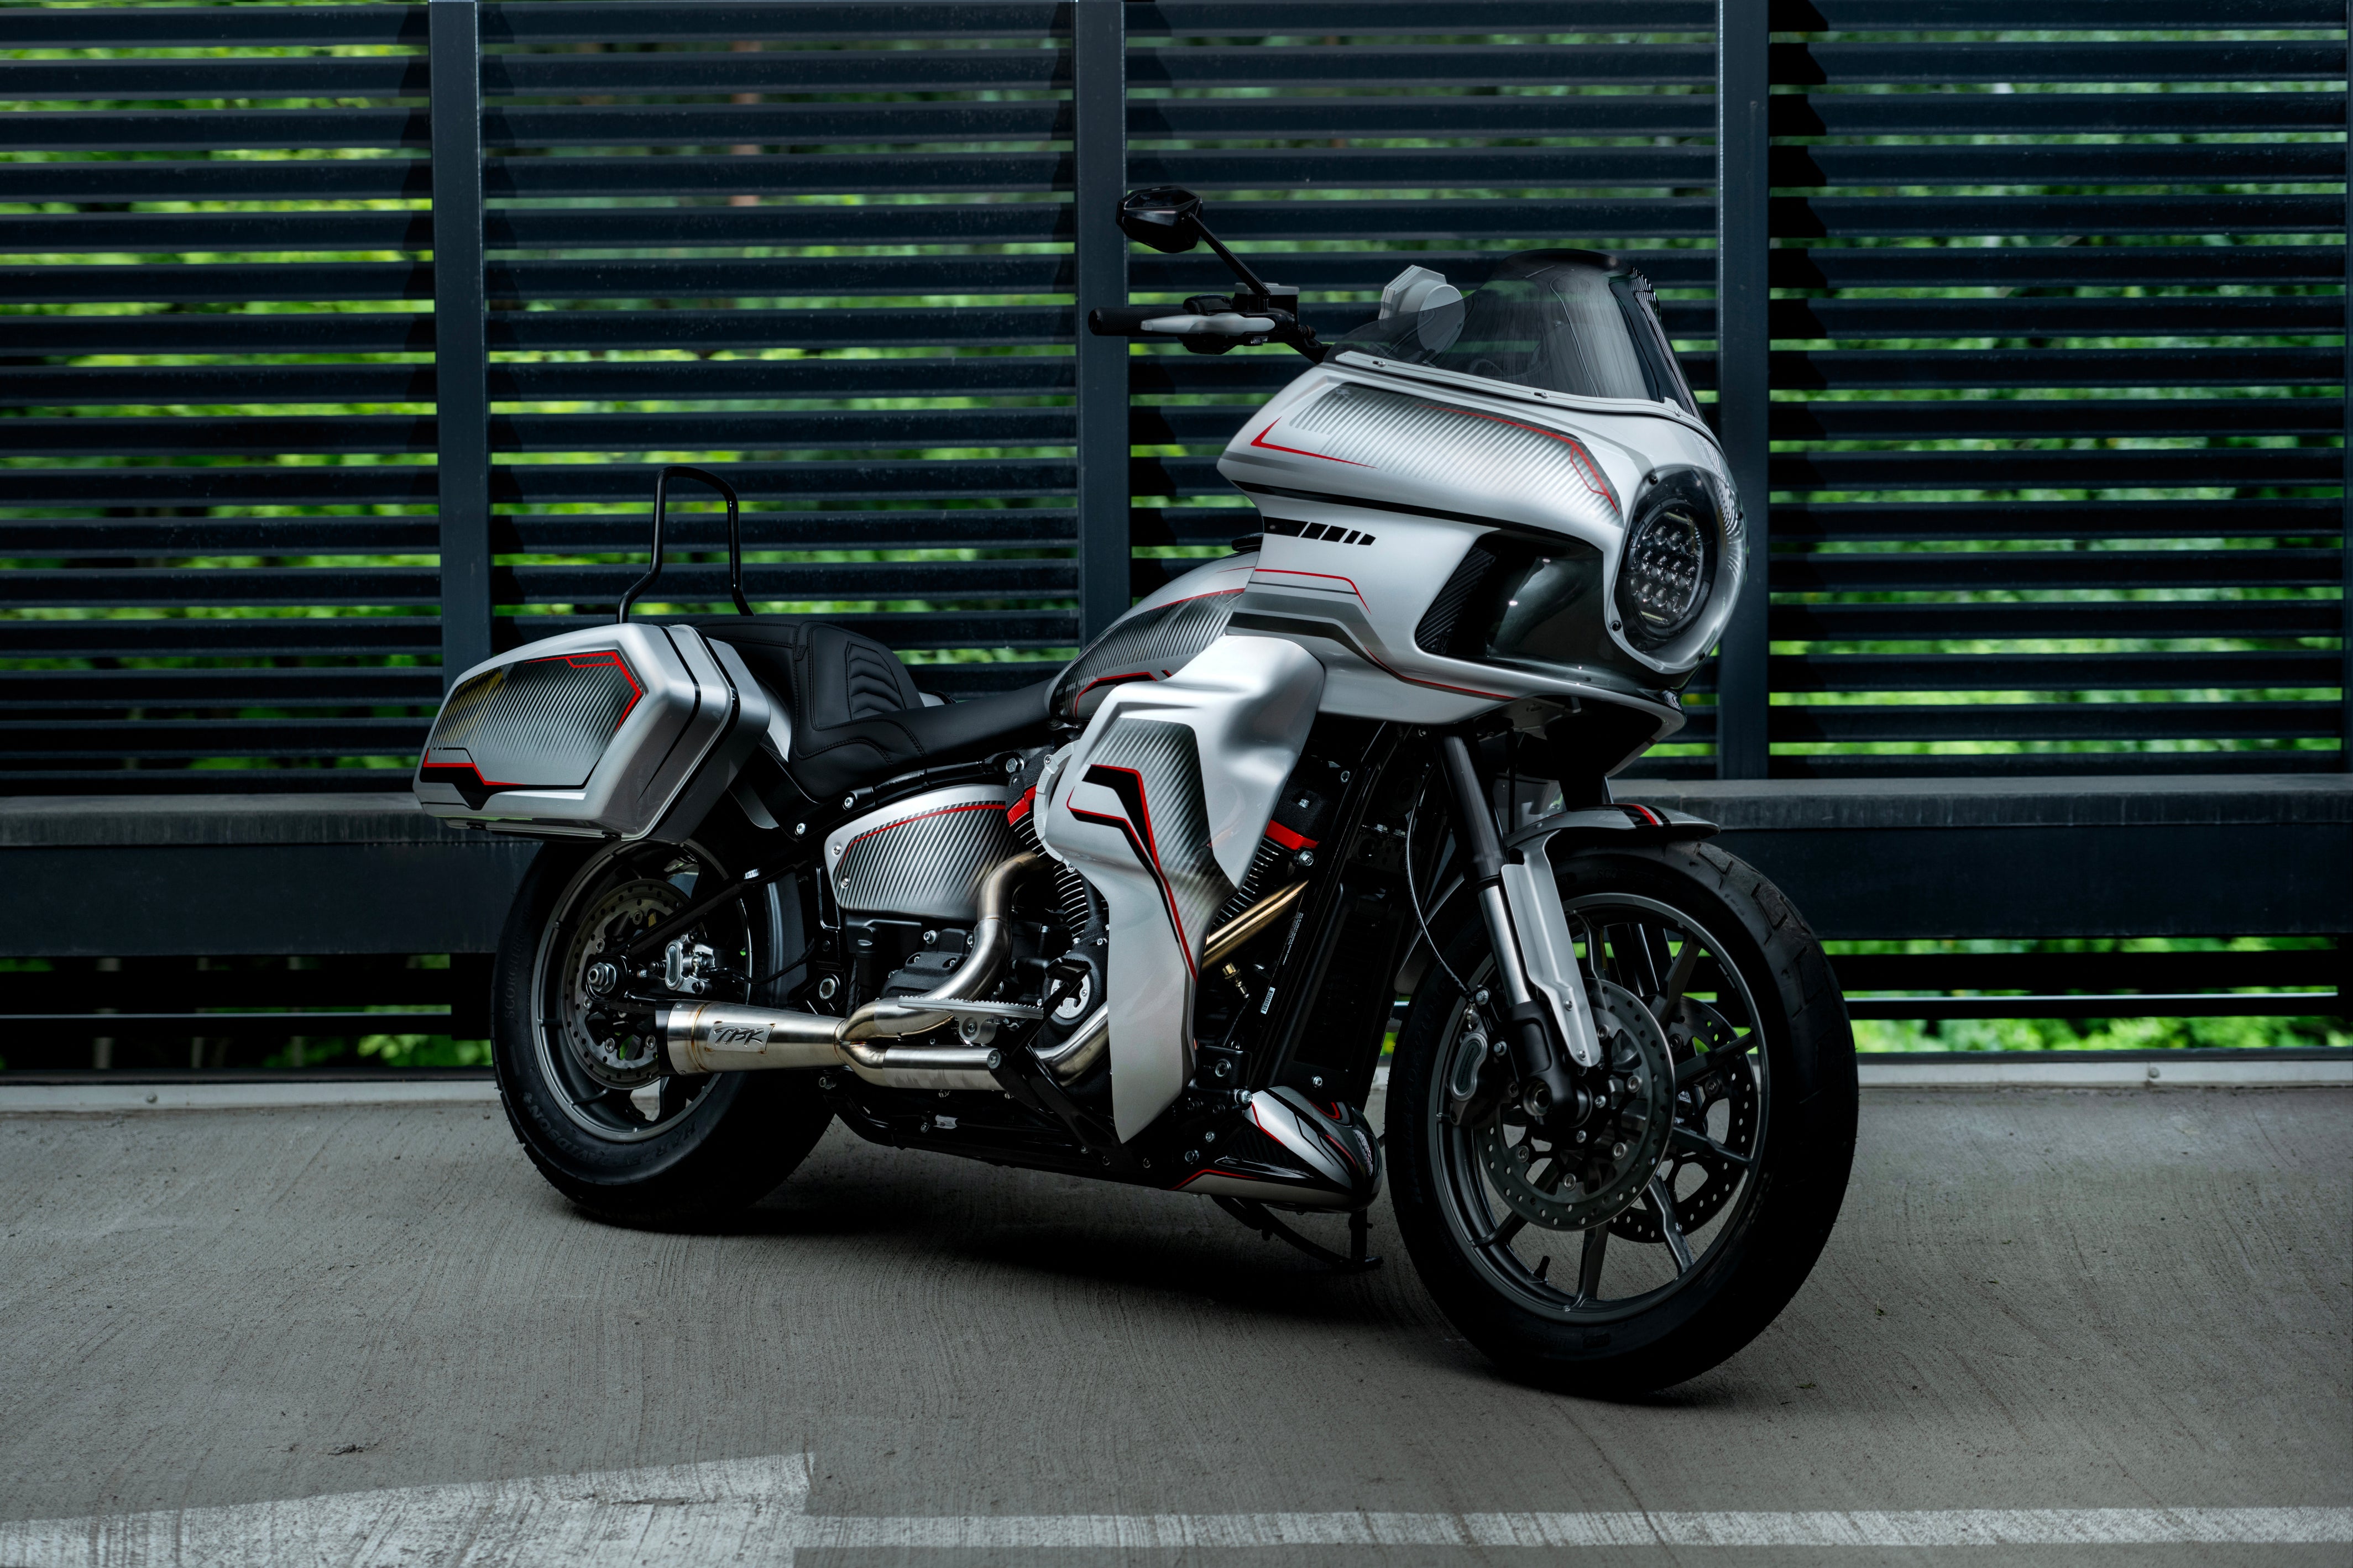 FXR Style Clubstyle Fairing for Softail models